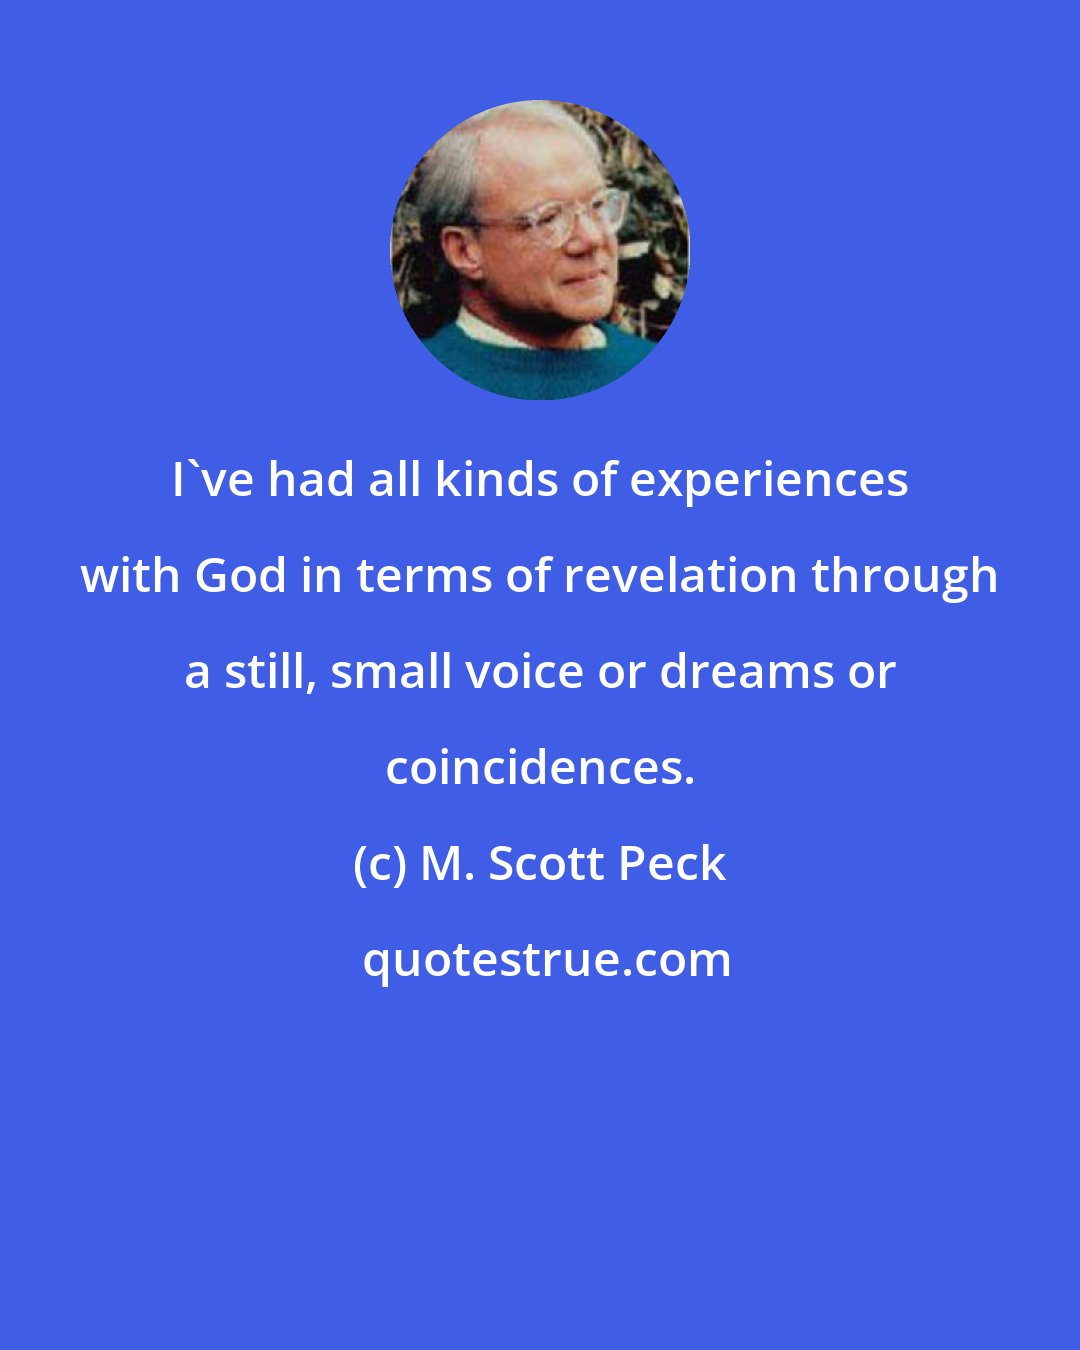 M. Scott Peck: I've had all kinds of experiences with God in terms of revelation through a still, small voice or dreams or coincidences.